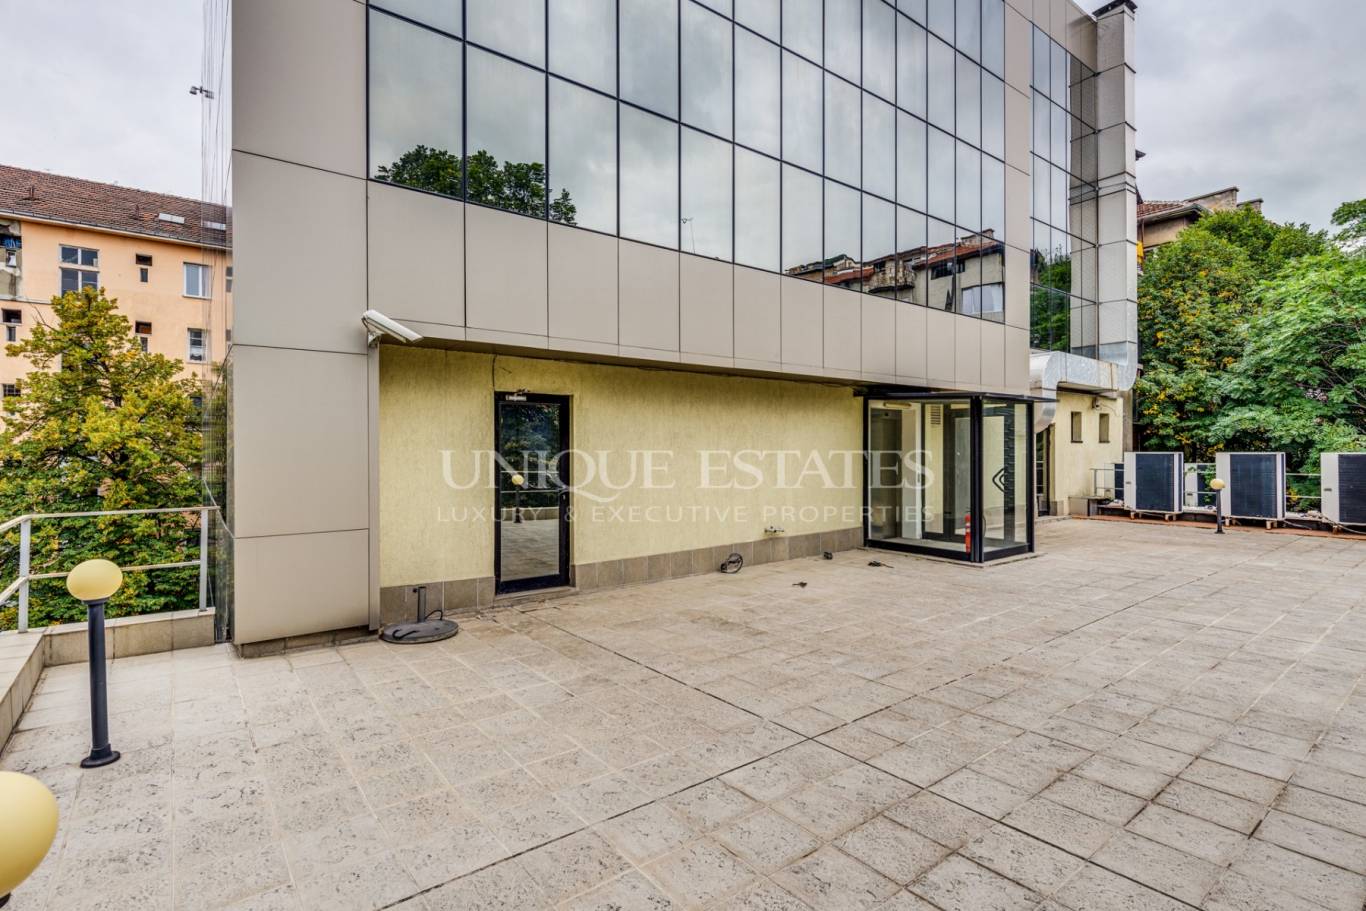 Office Building / Building for sale in Sofia, Downtown with listing ID: K13978 - image 2